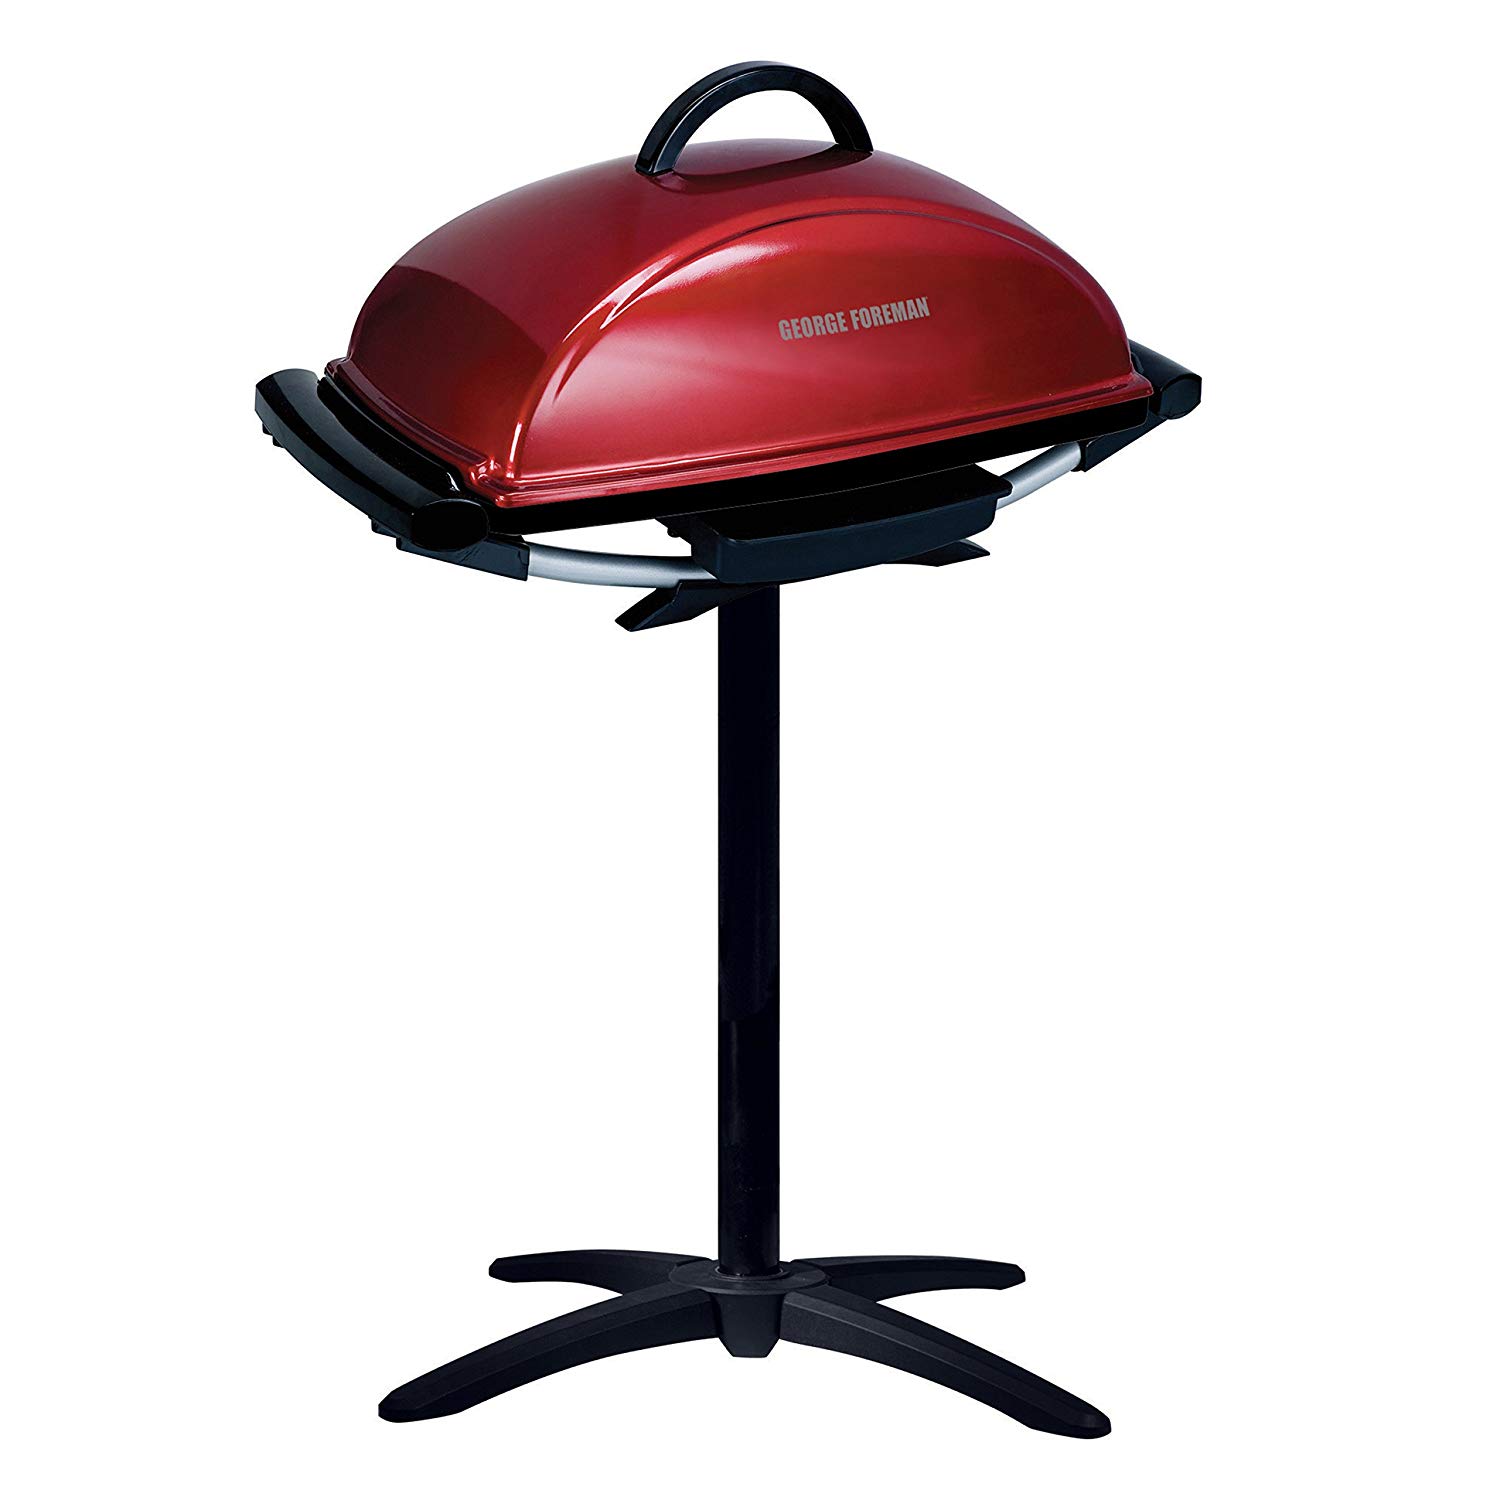 Best Deals On Barbecue Grills - Buy Electric, Charcoal and Propane Grills At Best Prices